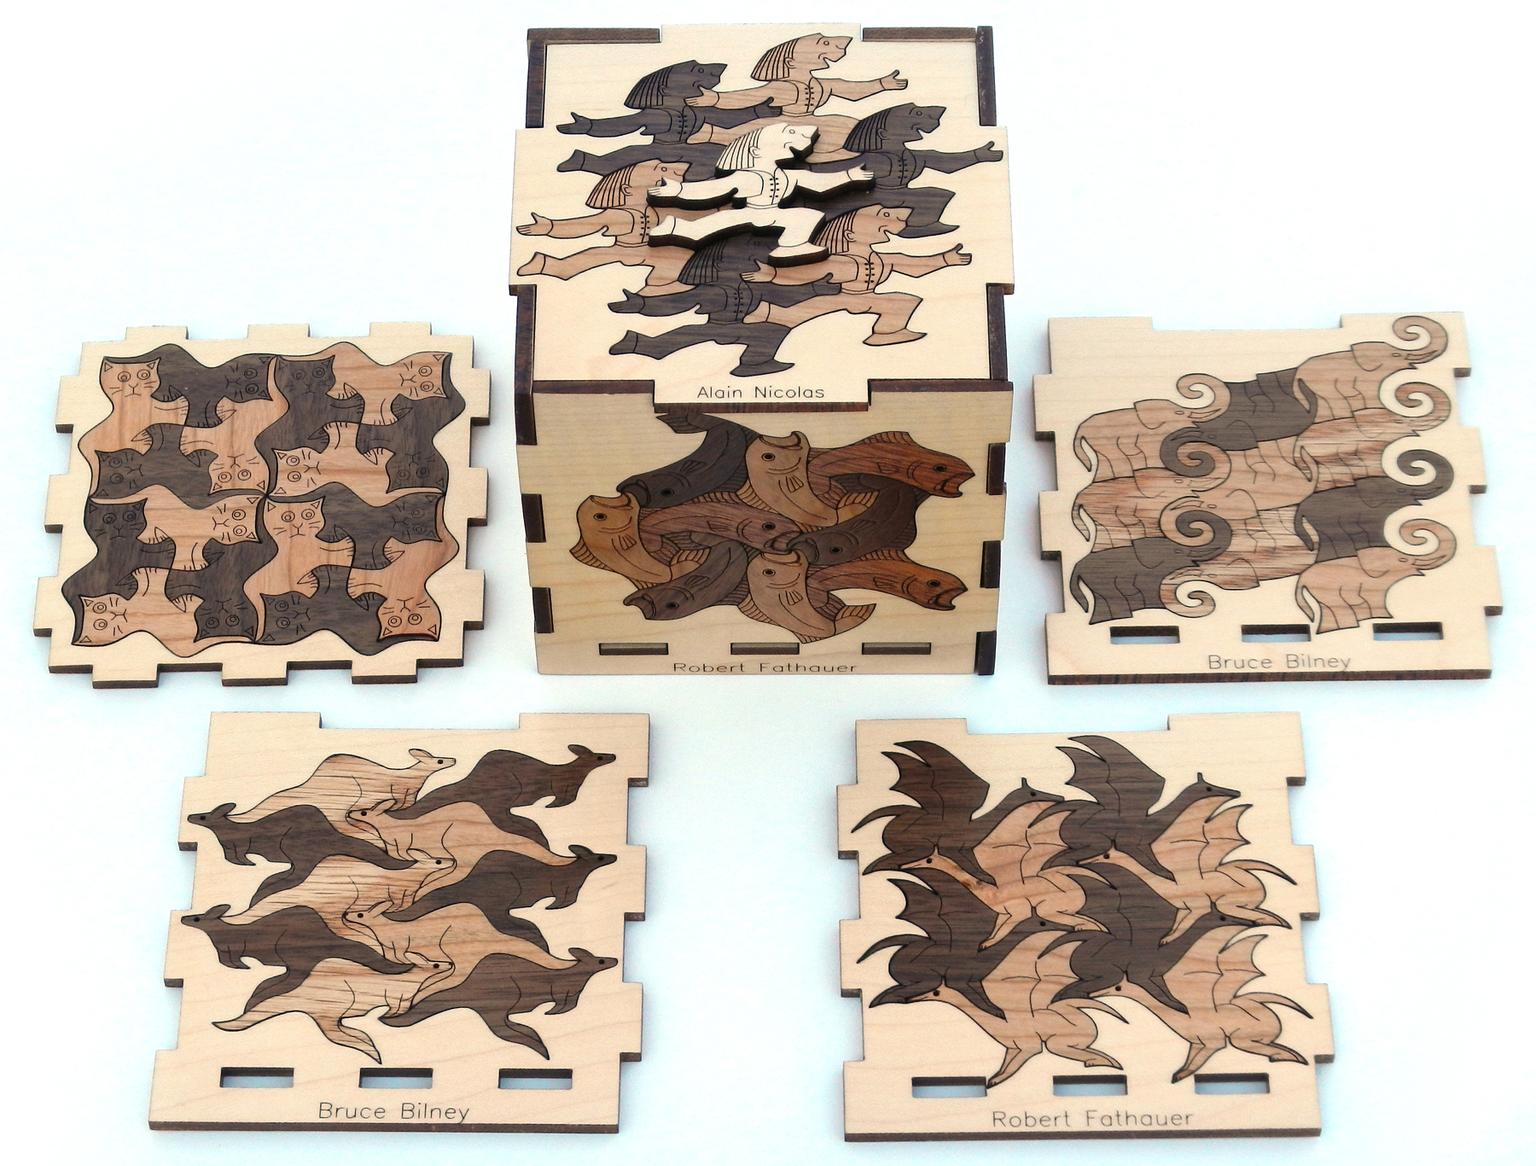 Image for entry 'Inlaid Wooden Box of Tessellations by Bruce Bilney, Robert Fathauer, and Alain Nicolas'